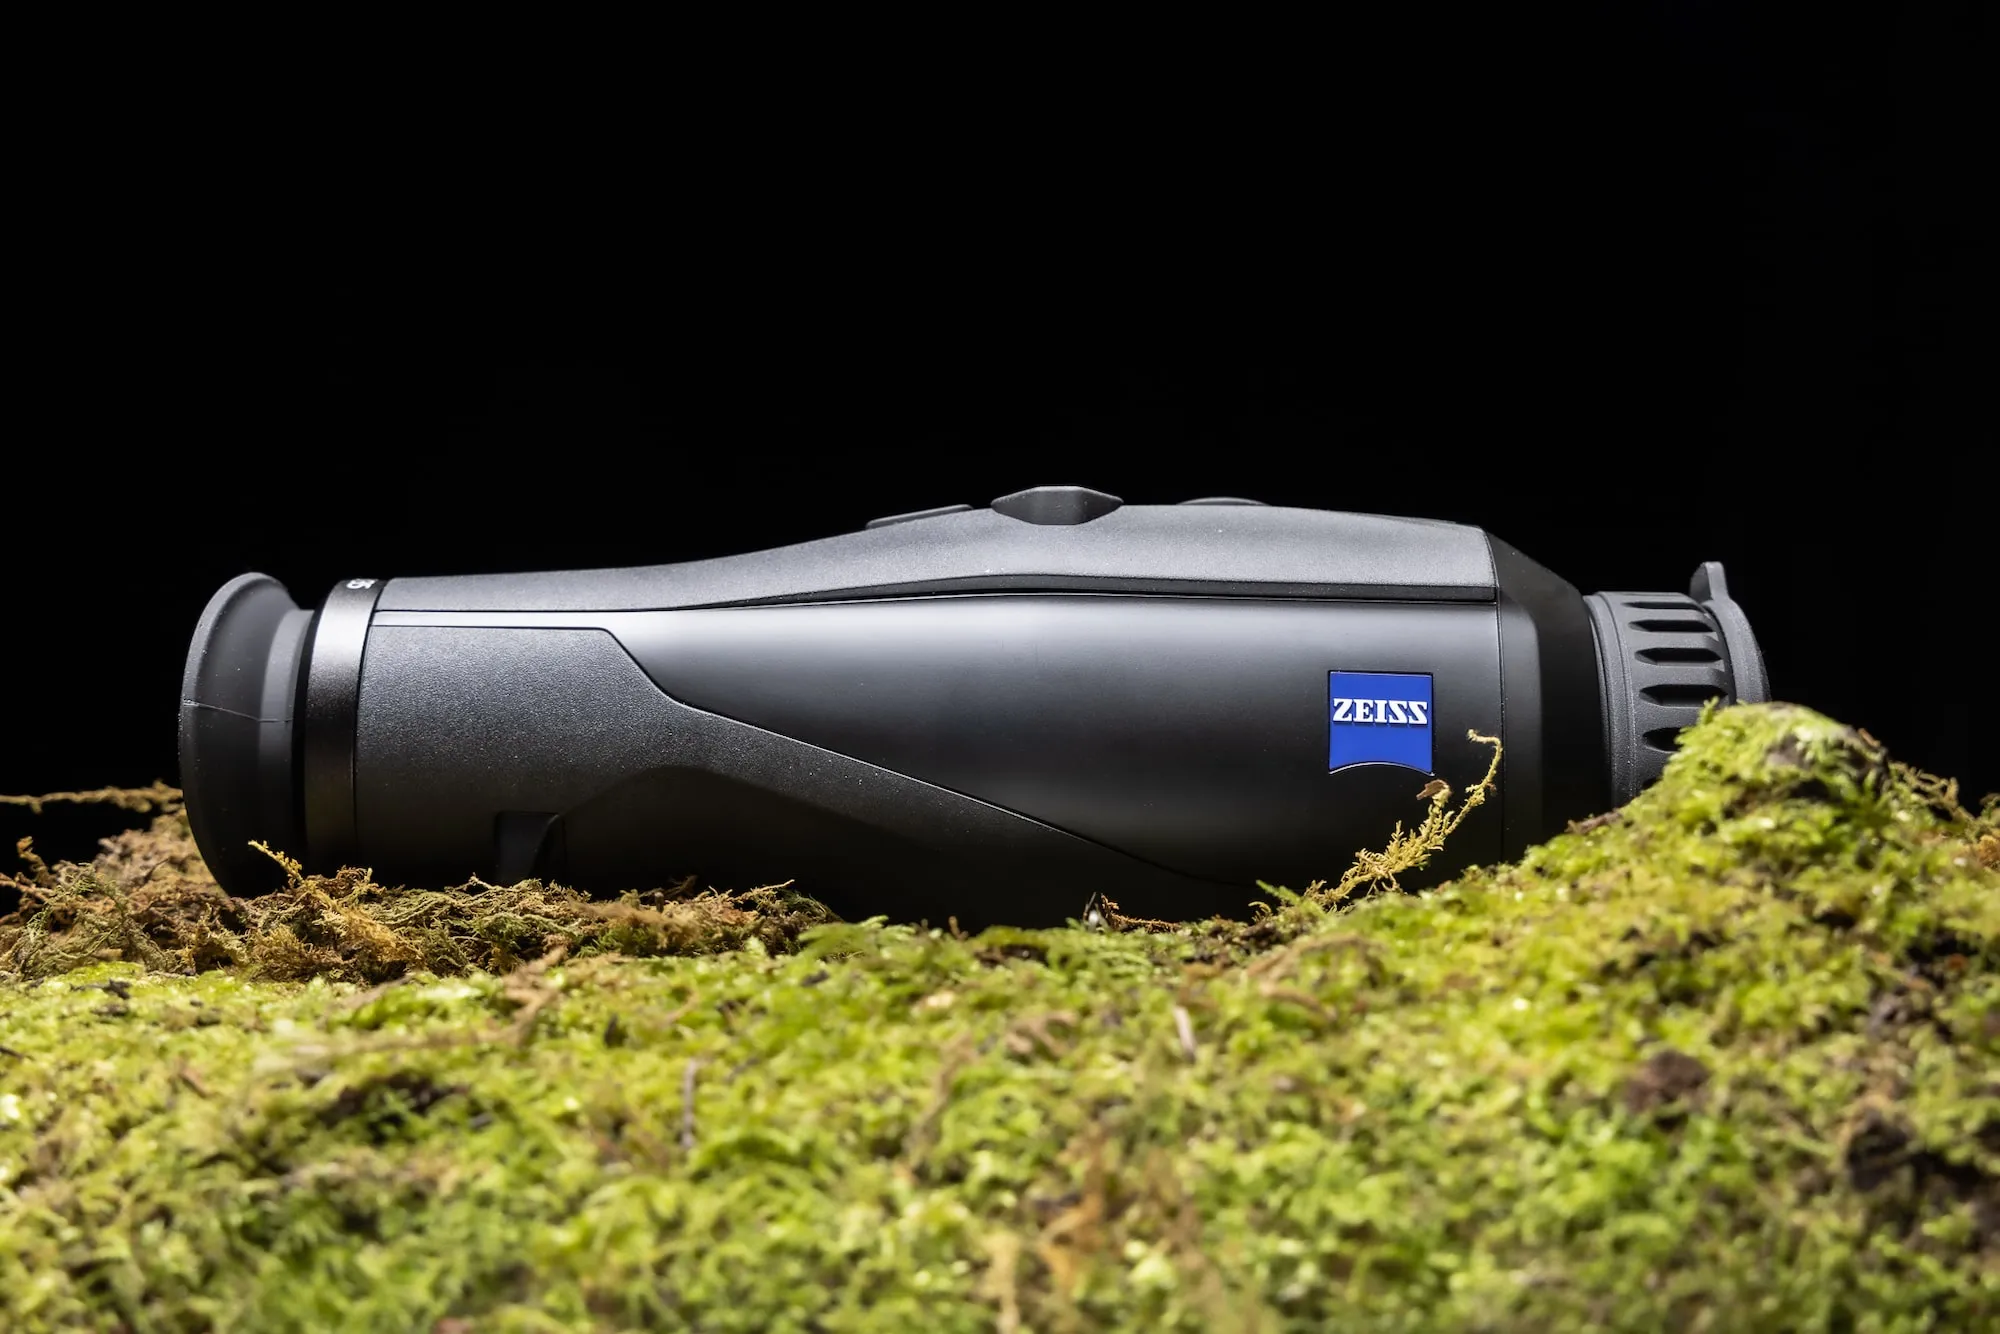 A Zeiss Thermal imager against a black background on moss